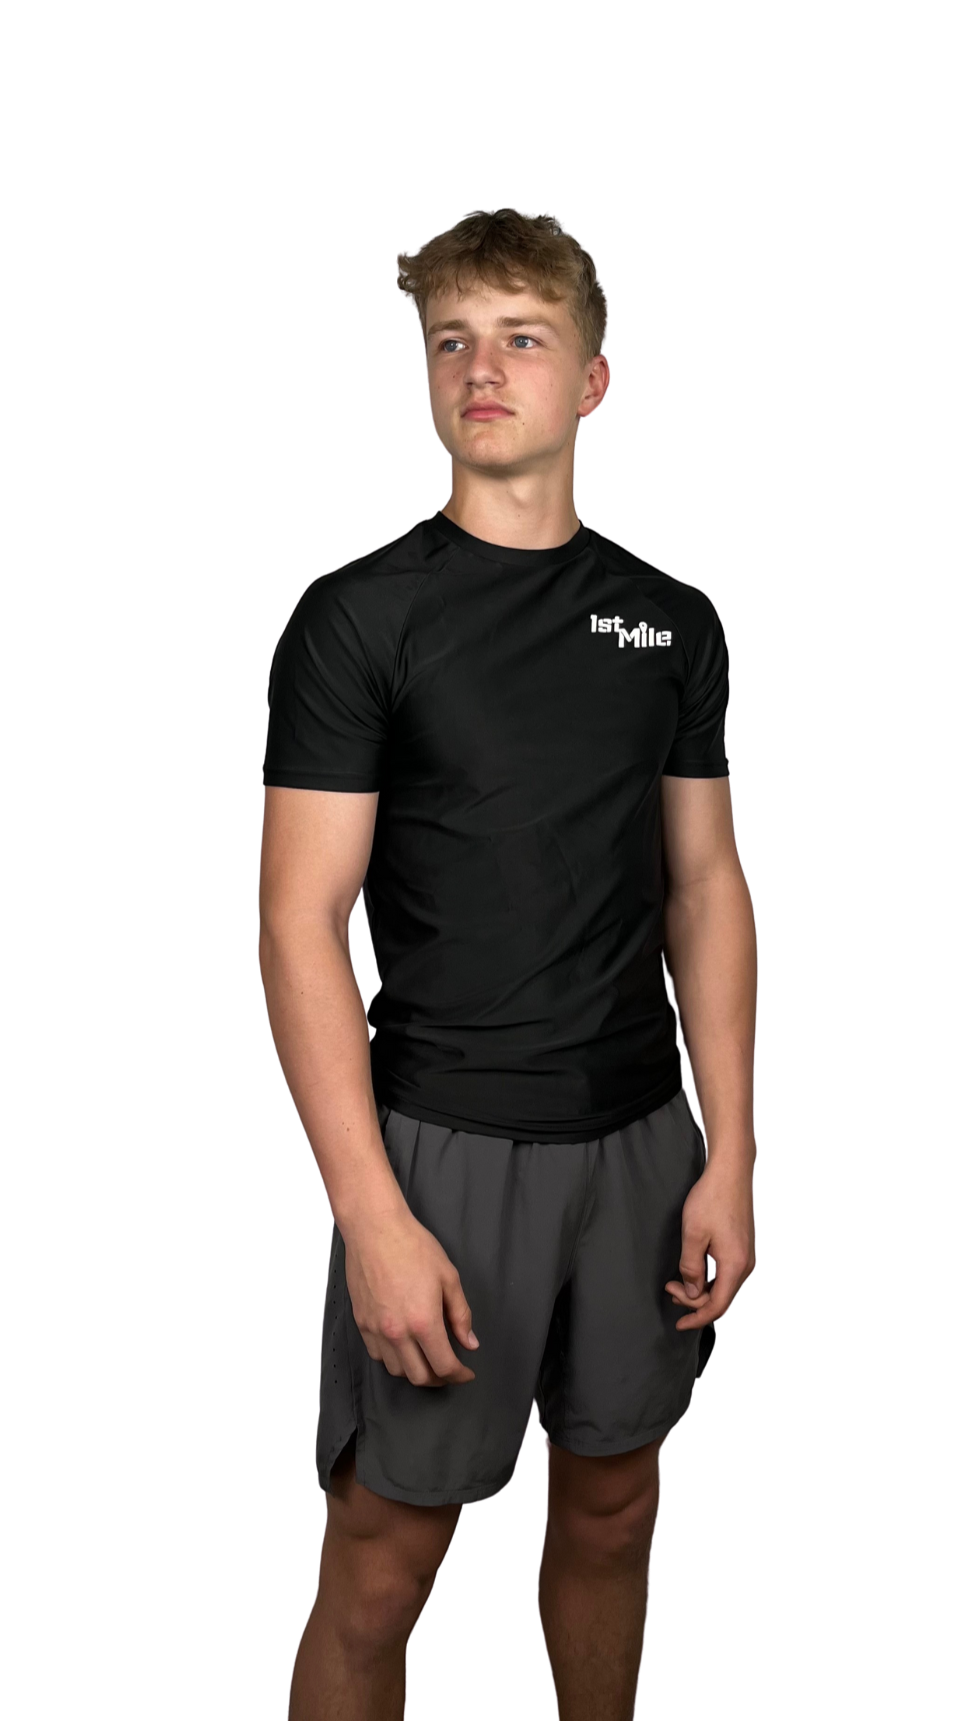 Forge Your Future Compression Tee